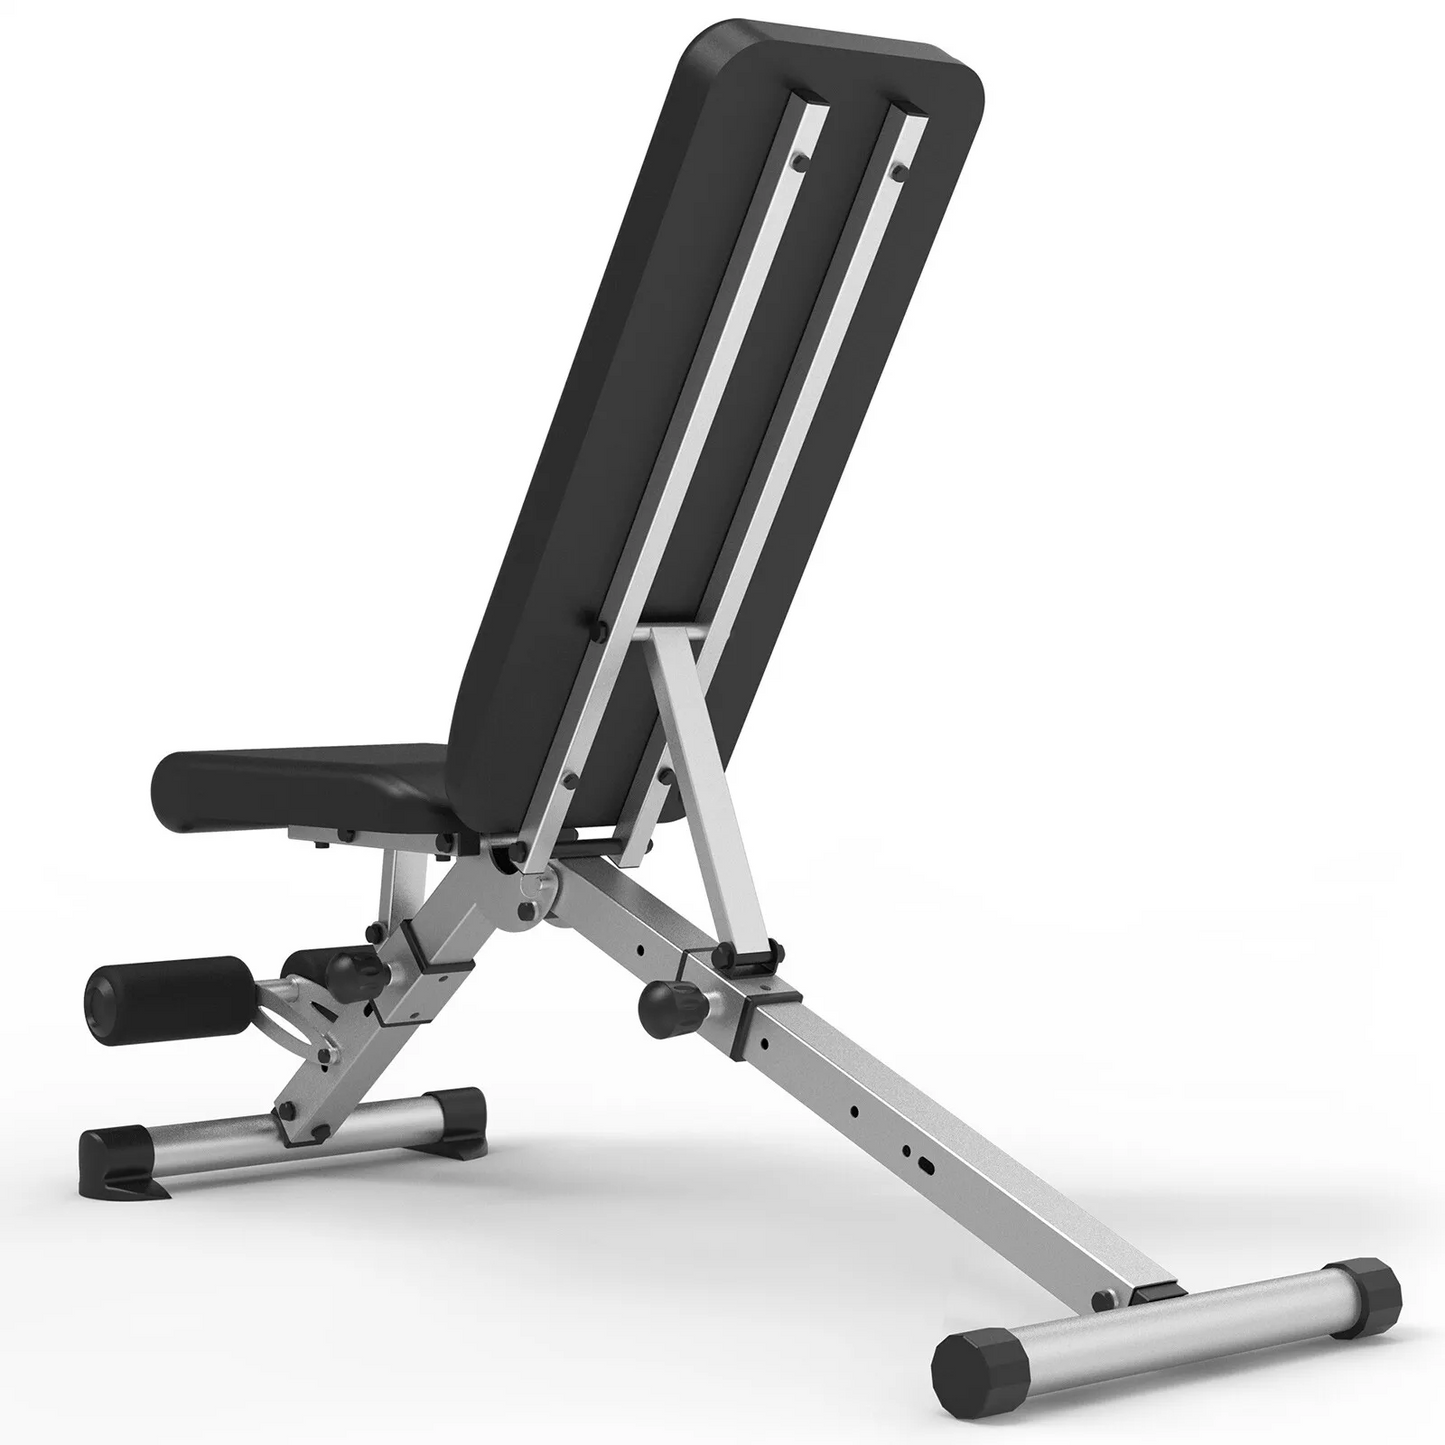 COOLBABY YLJSD Adjustable Utility Bench